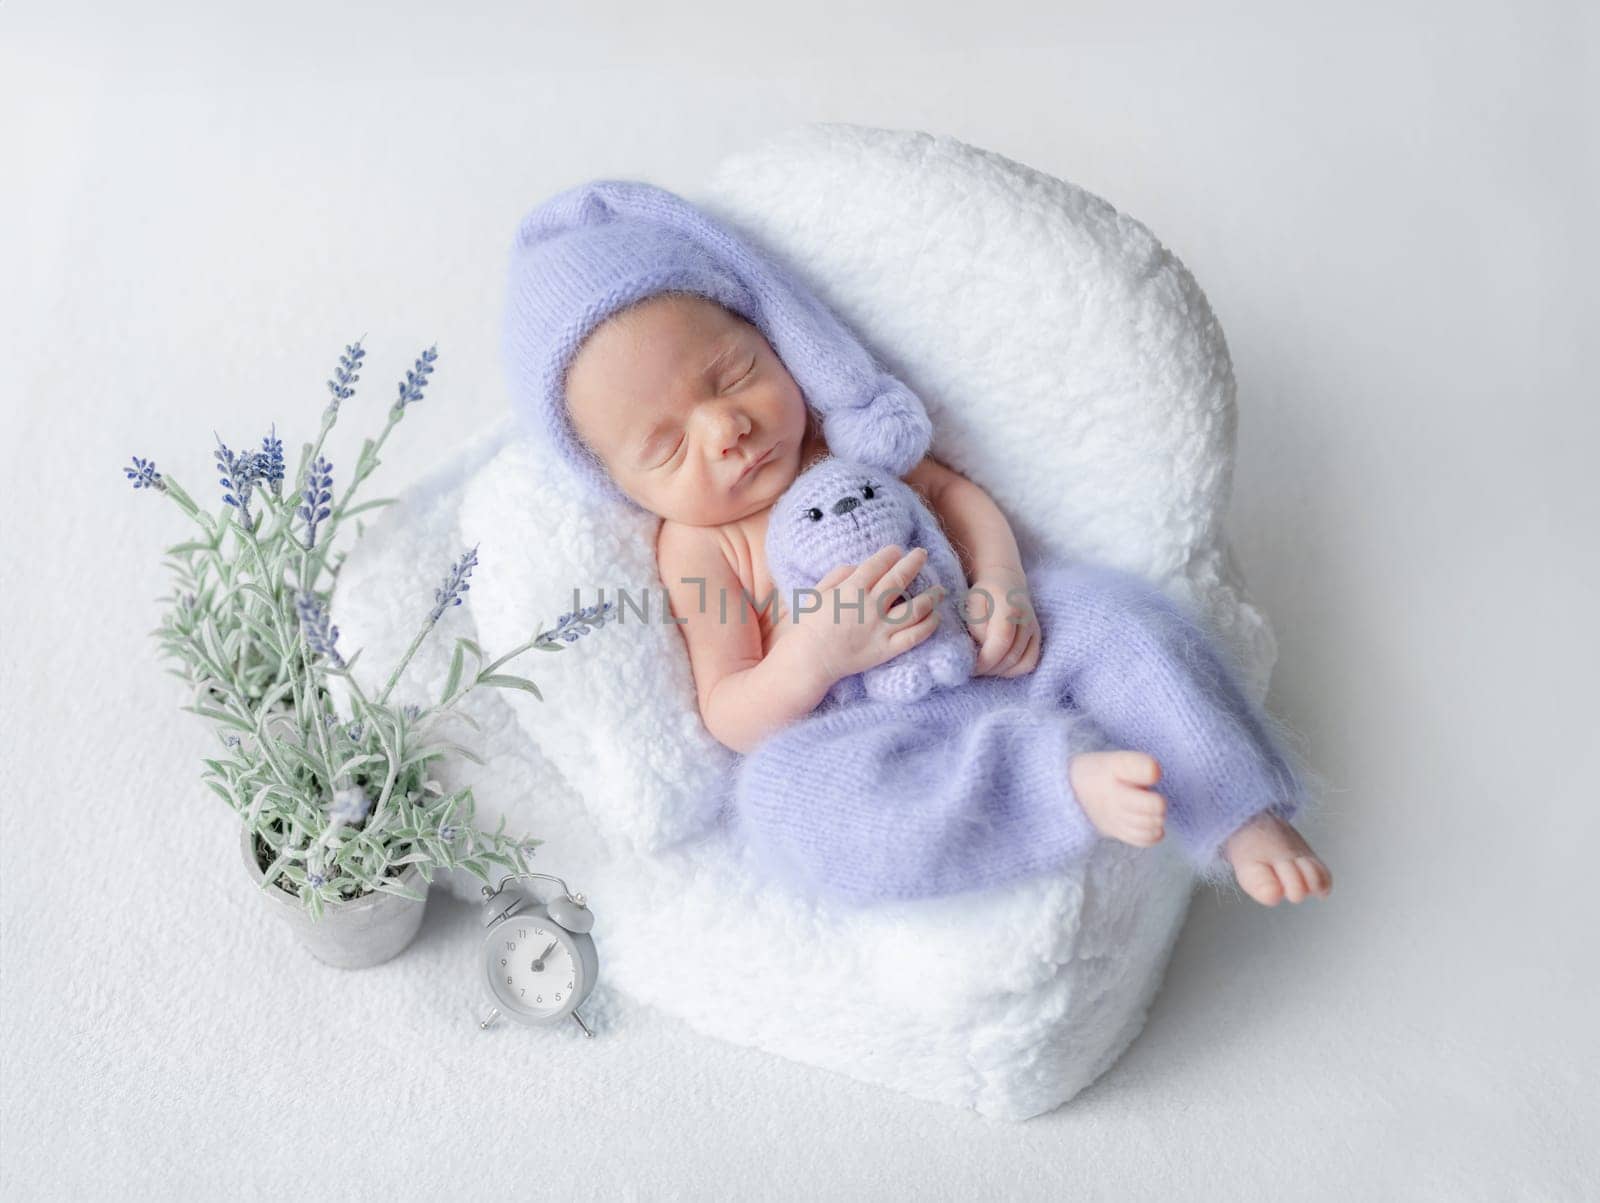 Newborn Baby In Lilac Pants And Cap Sleeps In Tiny Chair During Studio Photoshoot